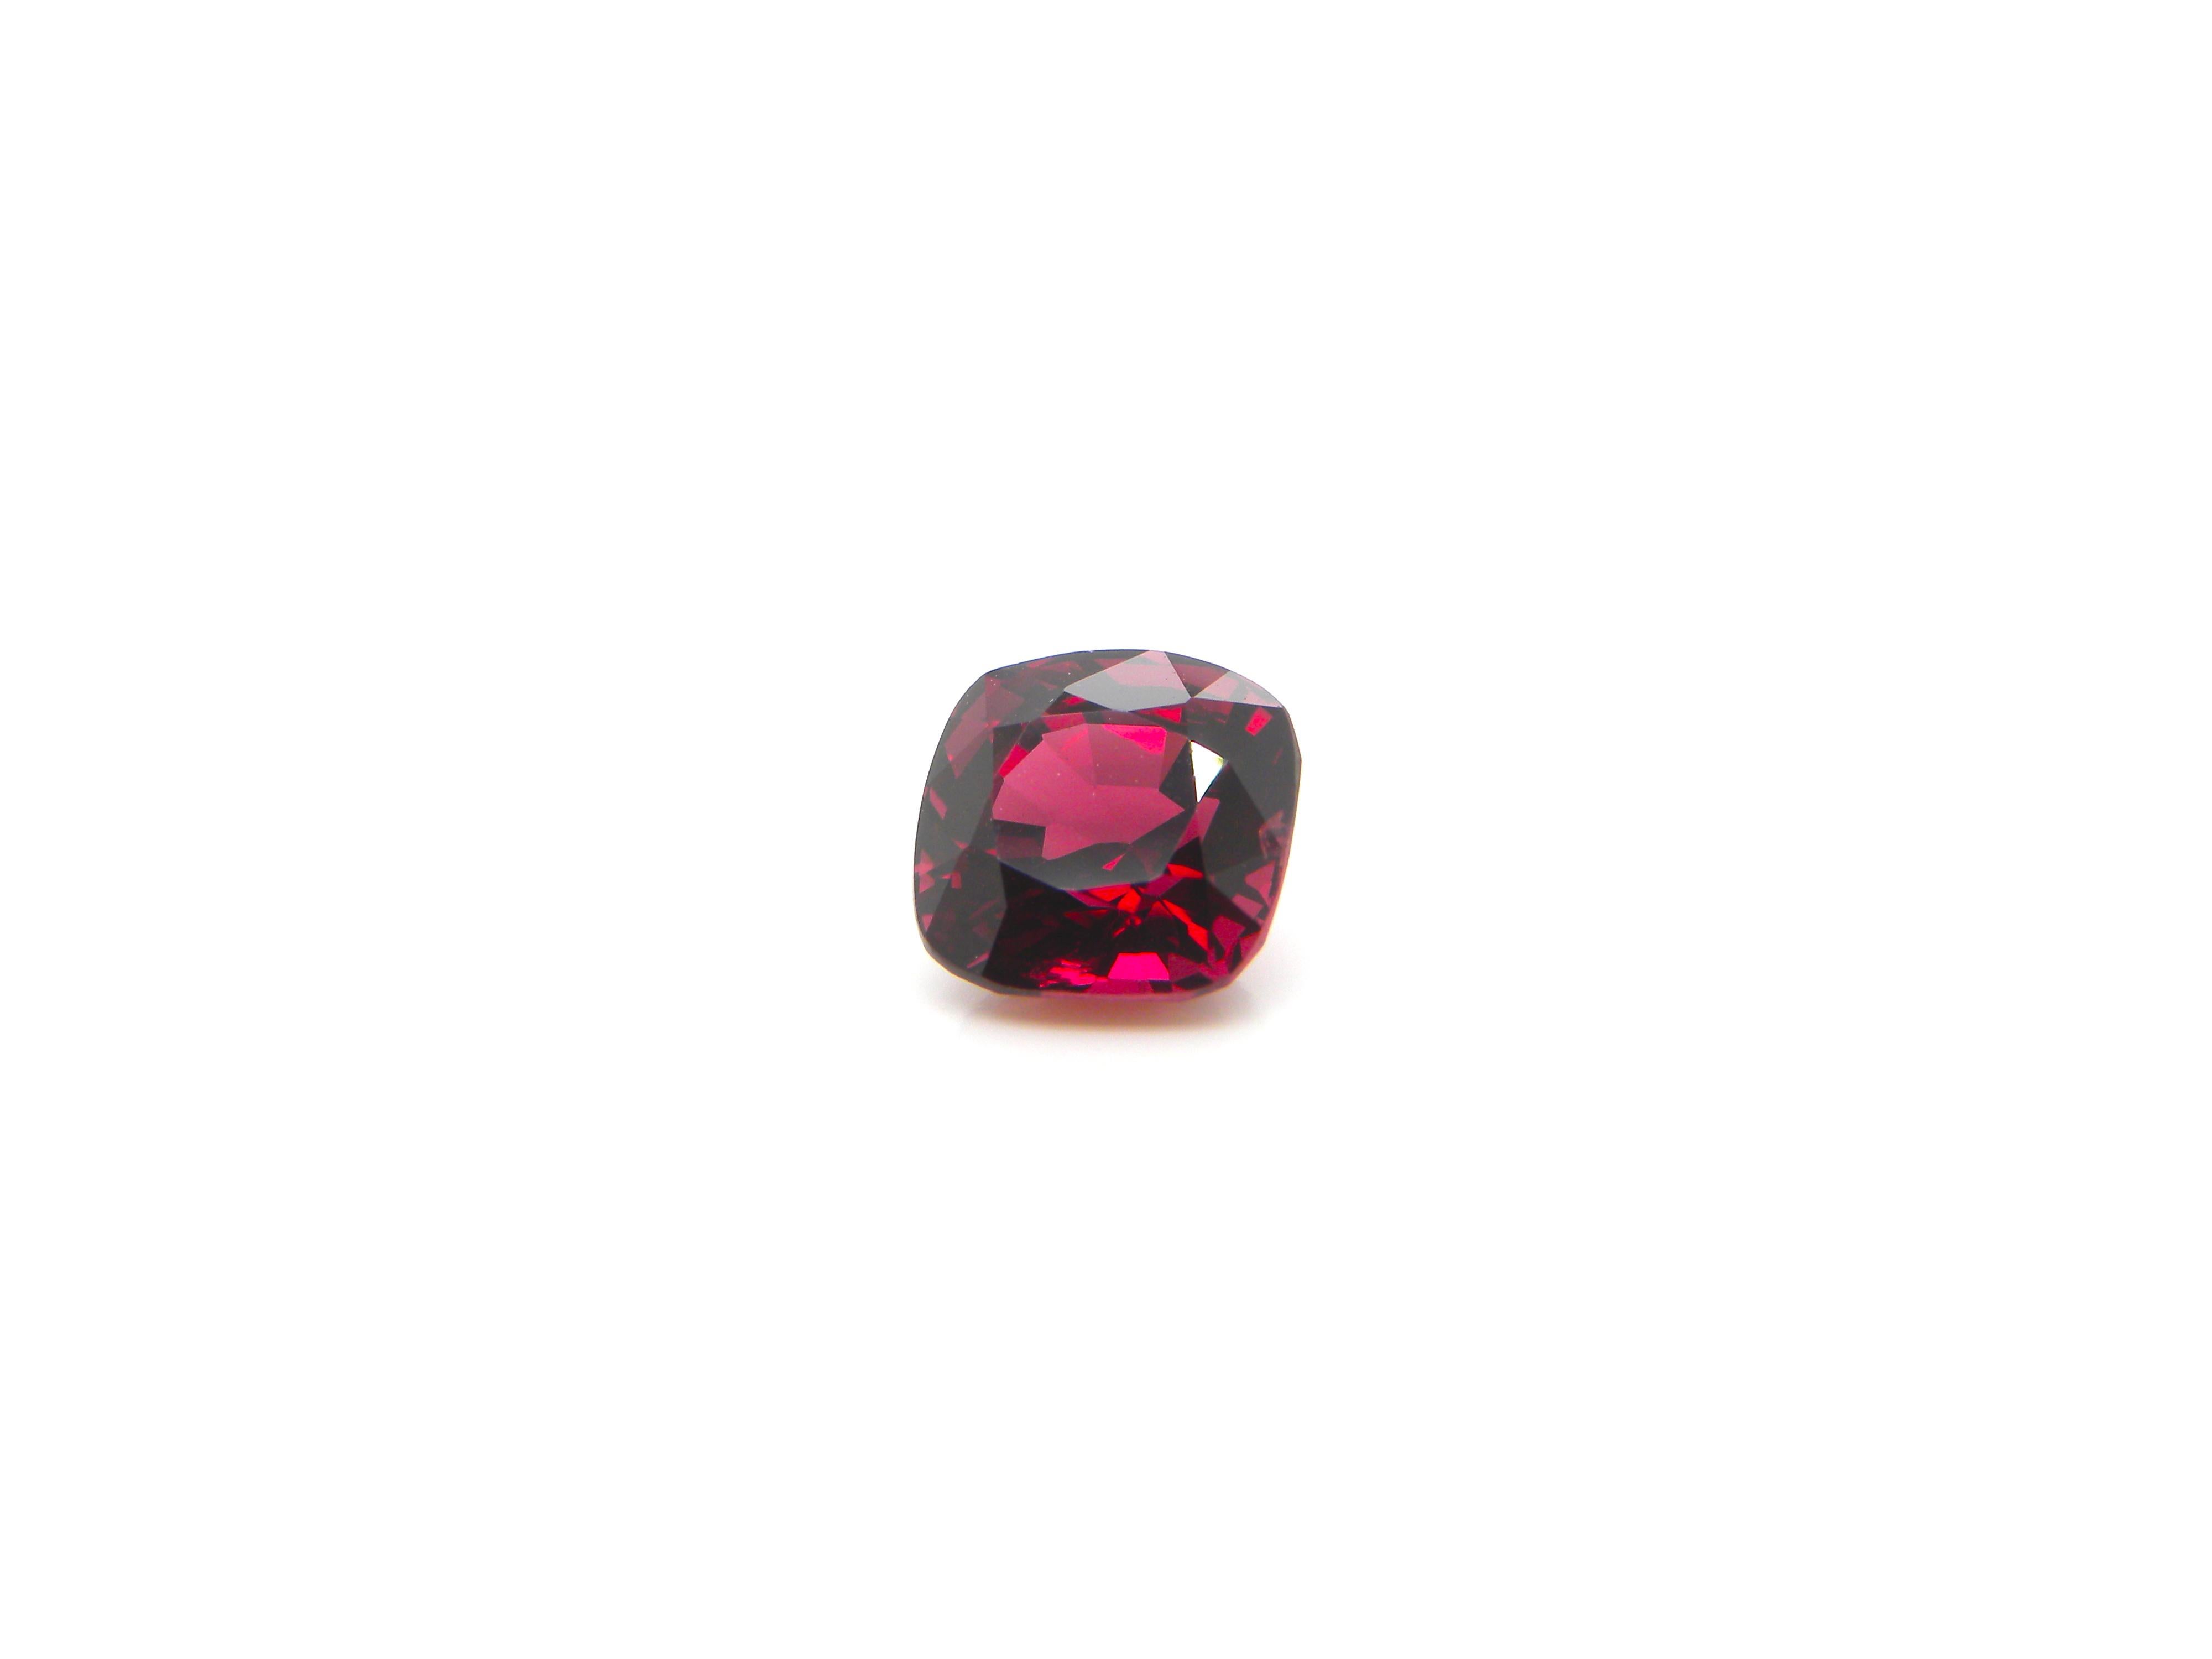 Contemporary 1.89 Carat Unheated Cushion-Cut Burmese Red Spinel For Sale